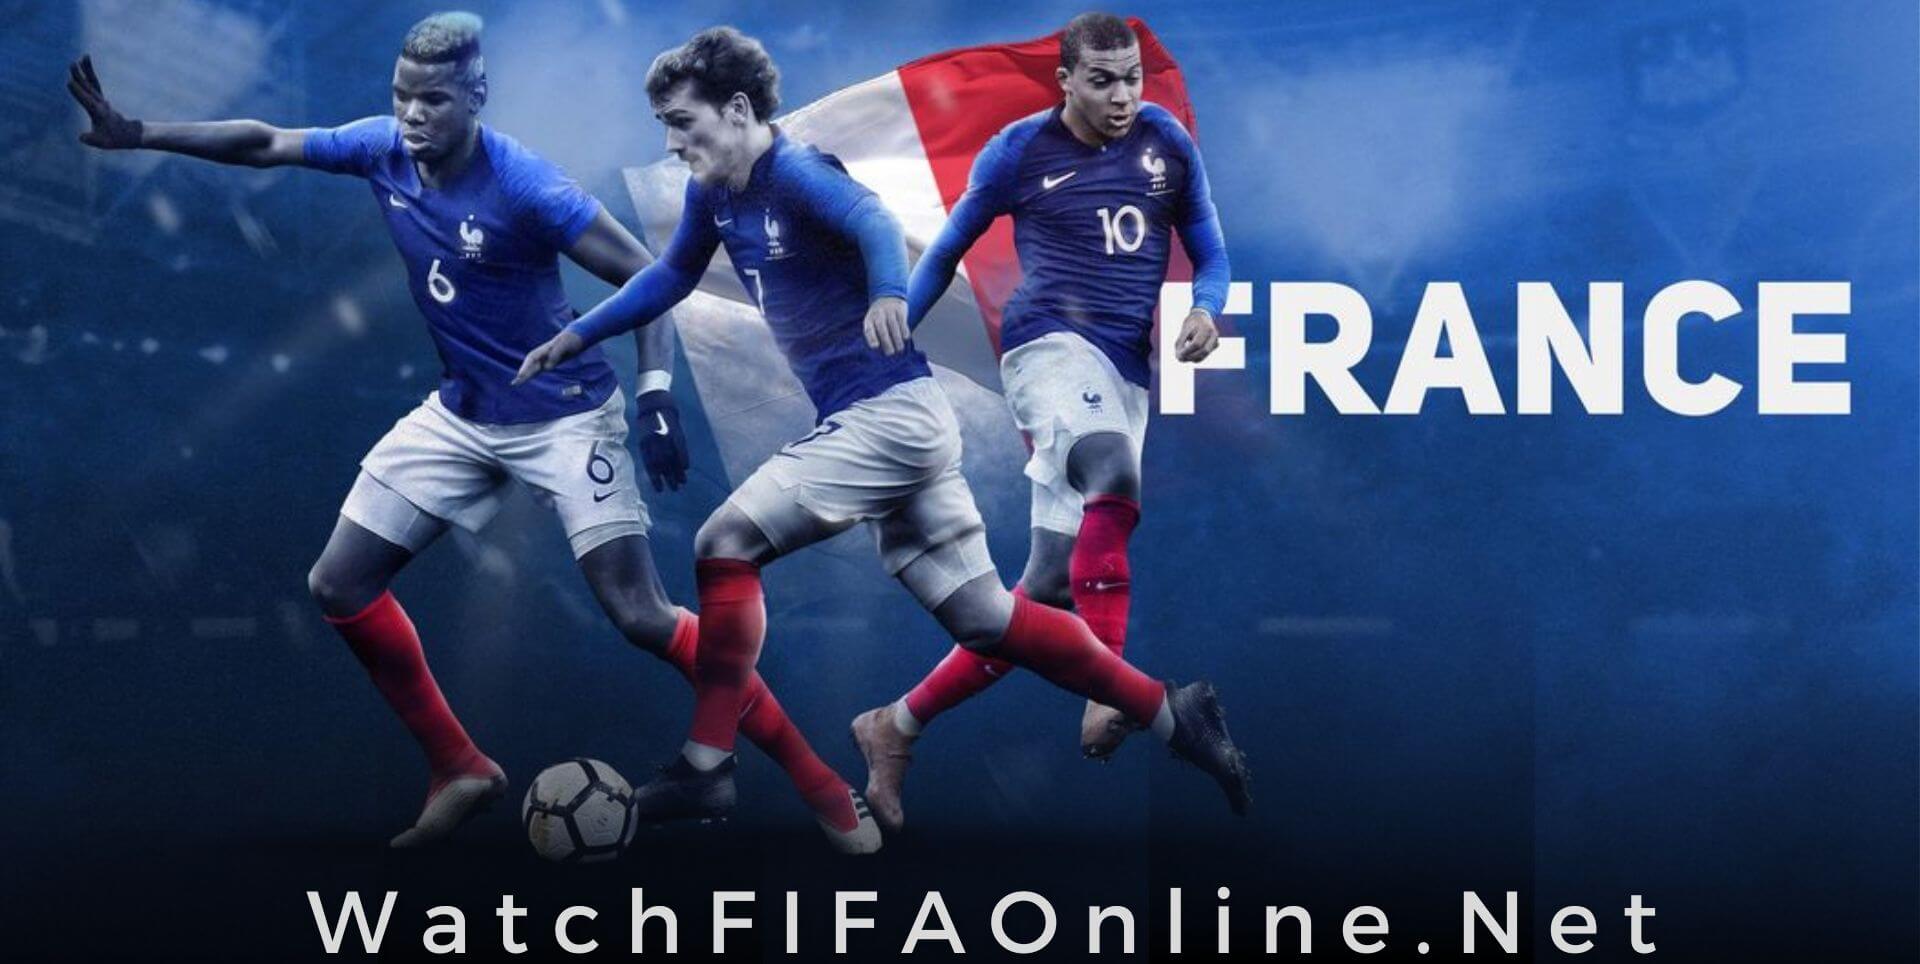 France Team Matches FIFA World Cup Stream